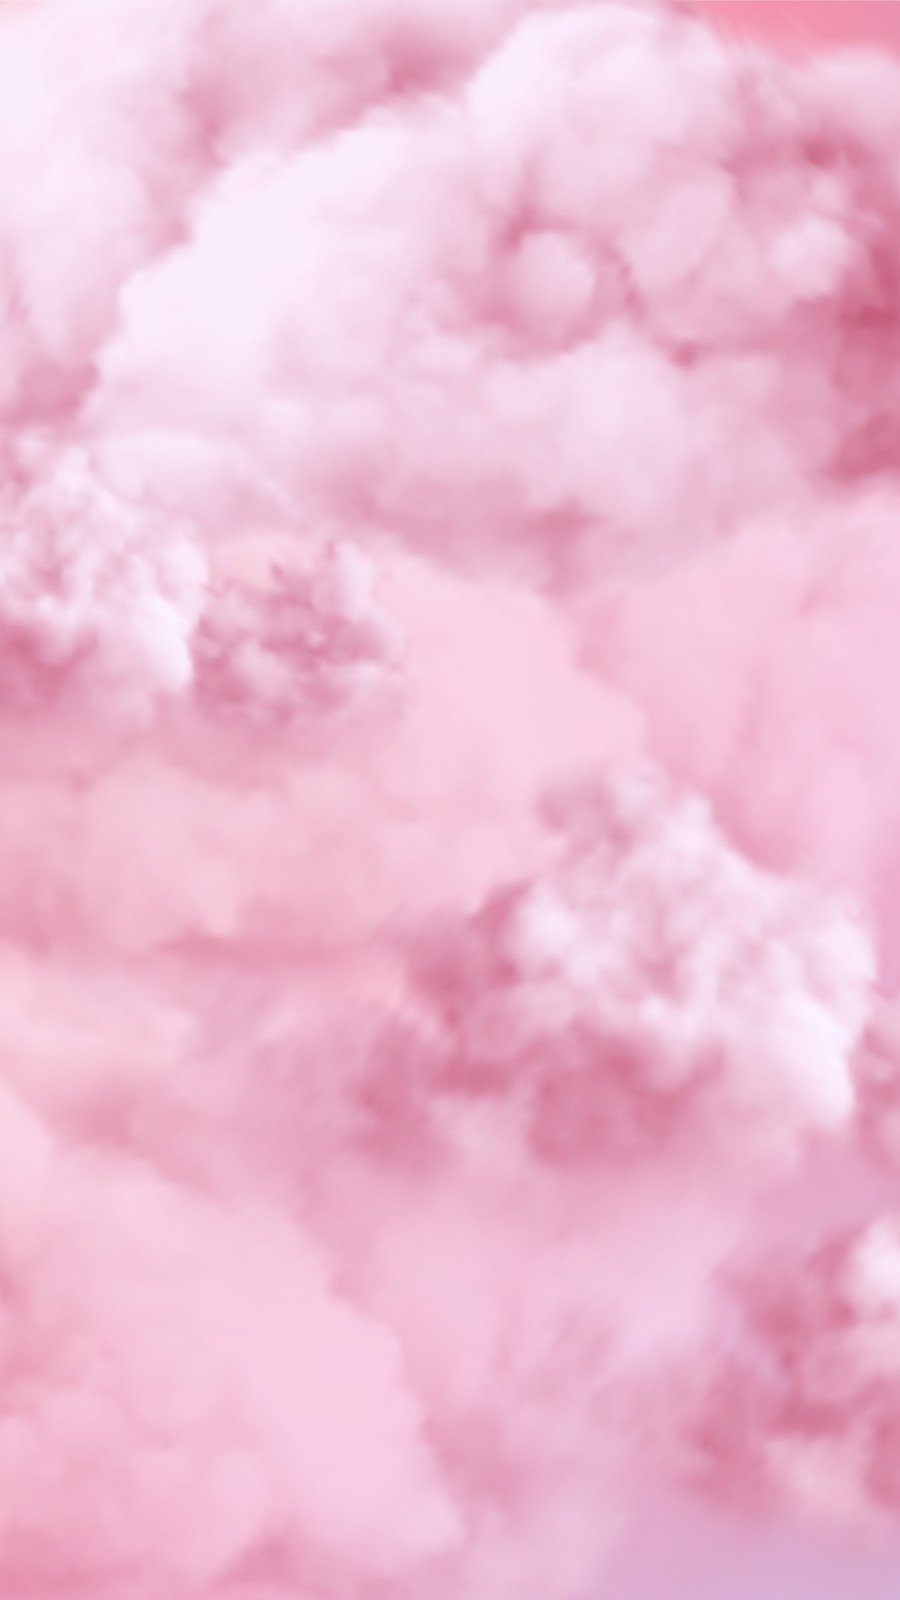 100+] Pink Phone Backgrounds, background wallpapers for phone